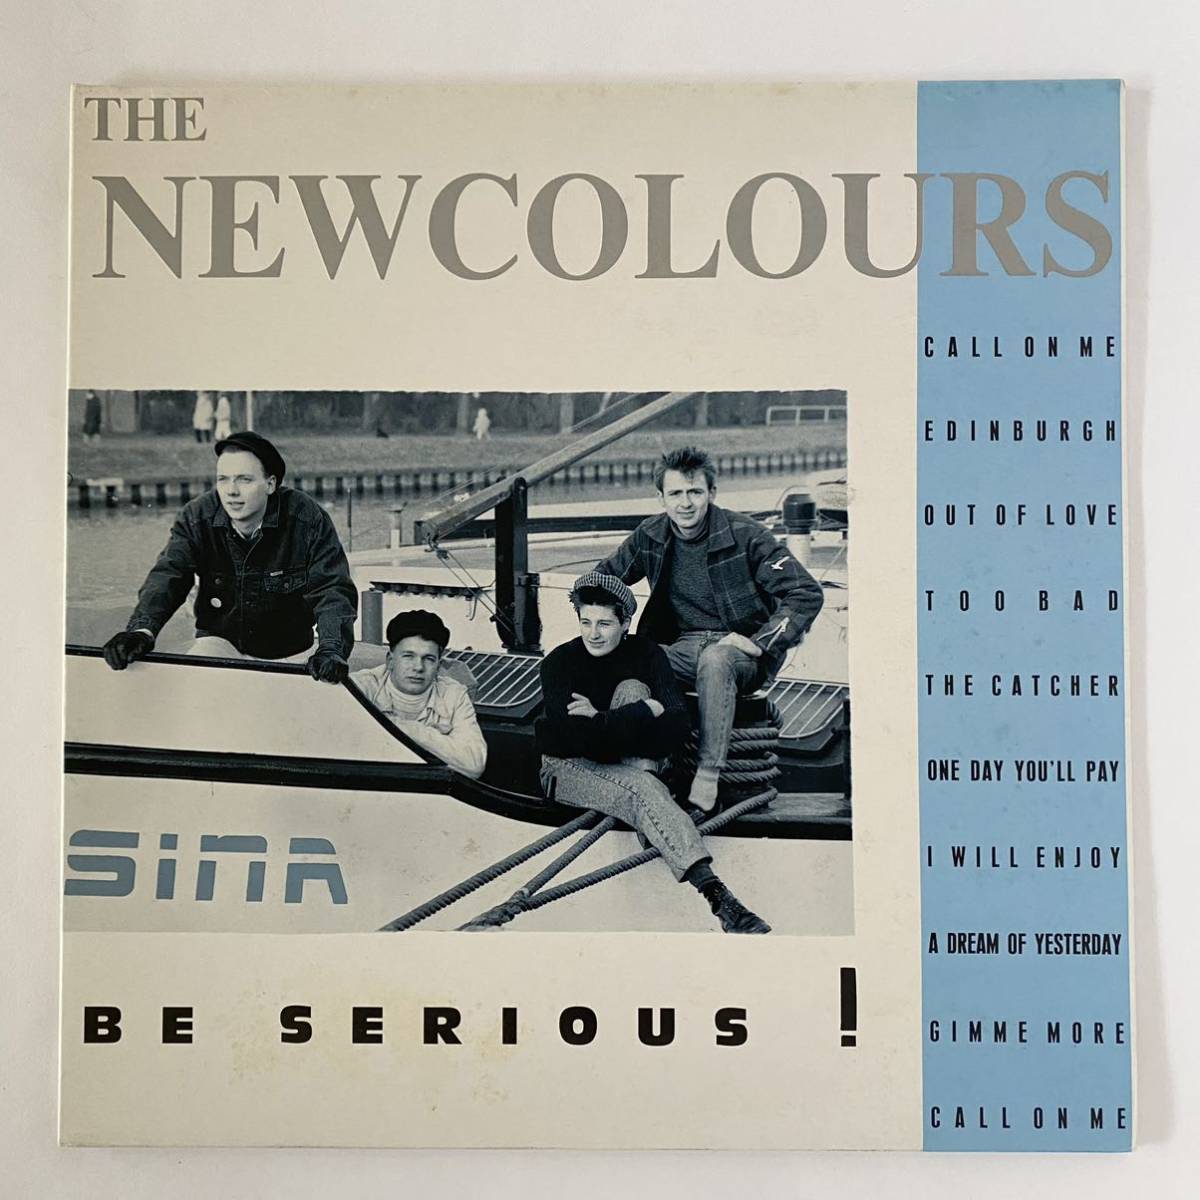 The Newcolours New Colours / Be Serious! [LP] ジャーマン ネオアコ ‘88年 名盤2nd! 希少オリジナル盤 美品 ギターポップ_画像1